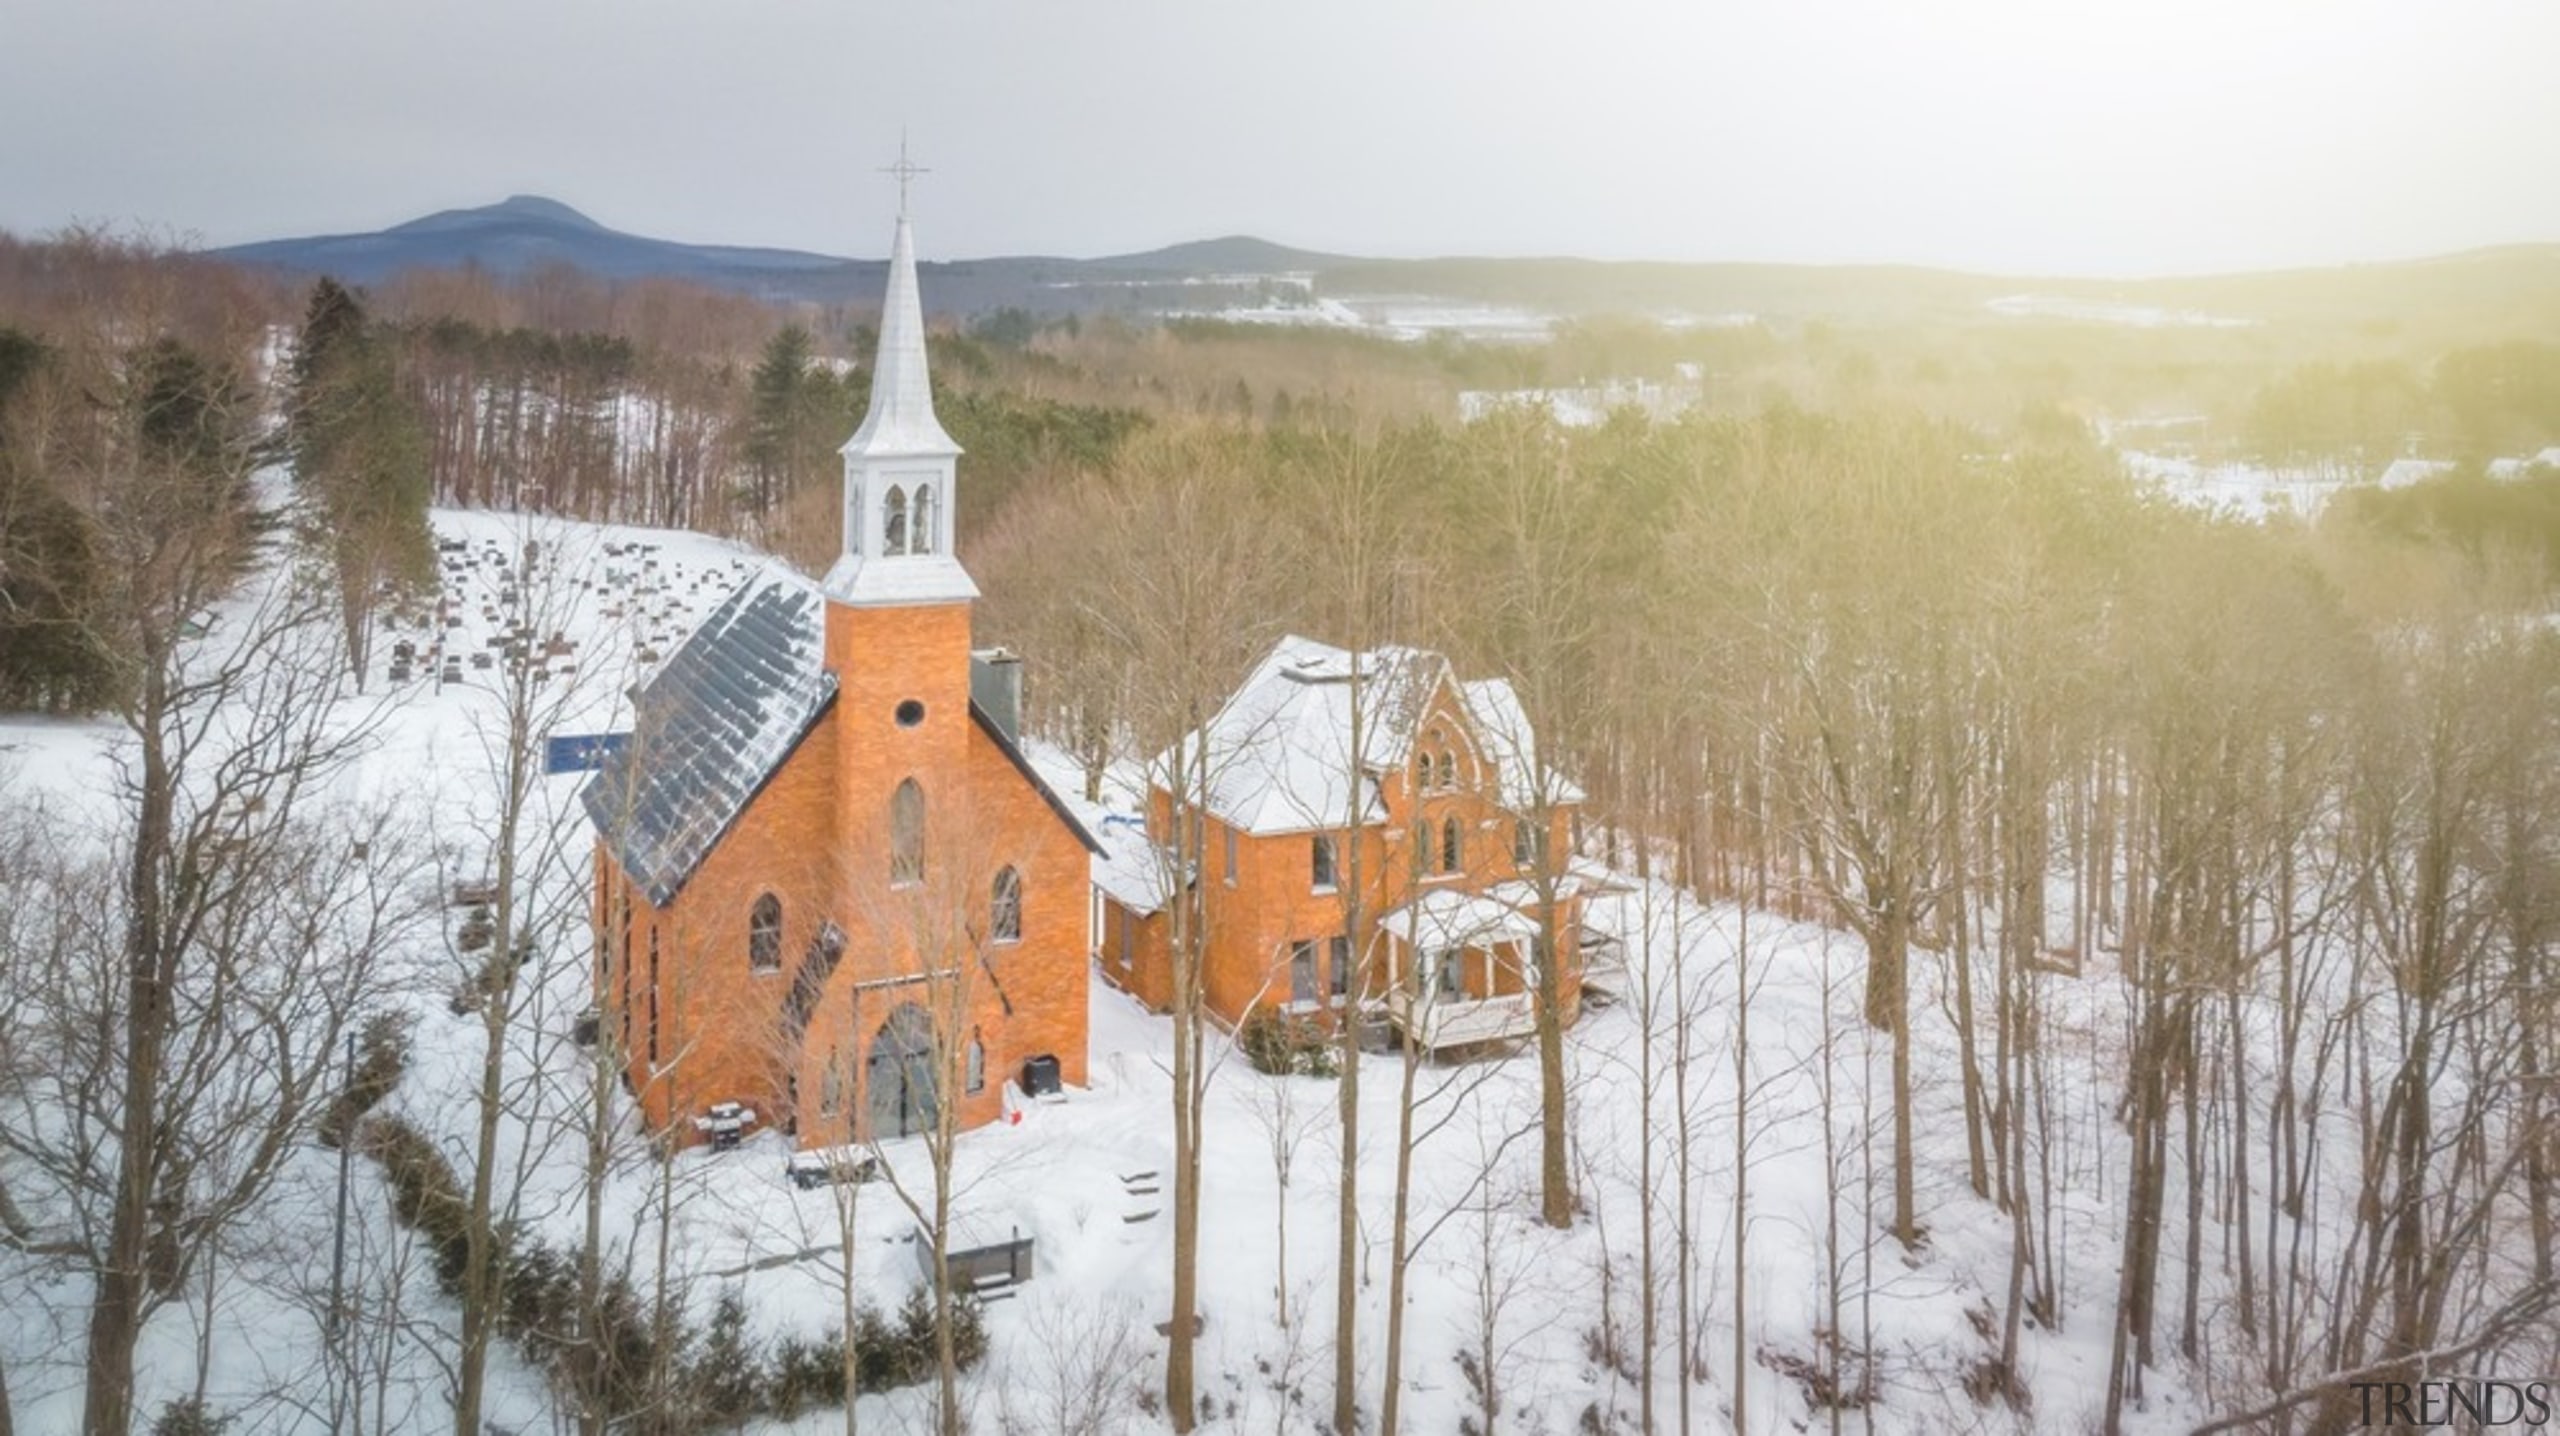 Neogothic architecture with contemporary character architecture, atmospheric phenomenon, building, chapel, church, freezing, geological phenomenon, place of worship, rural area, snow, steeple, winter, white